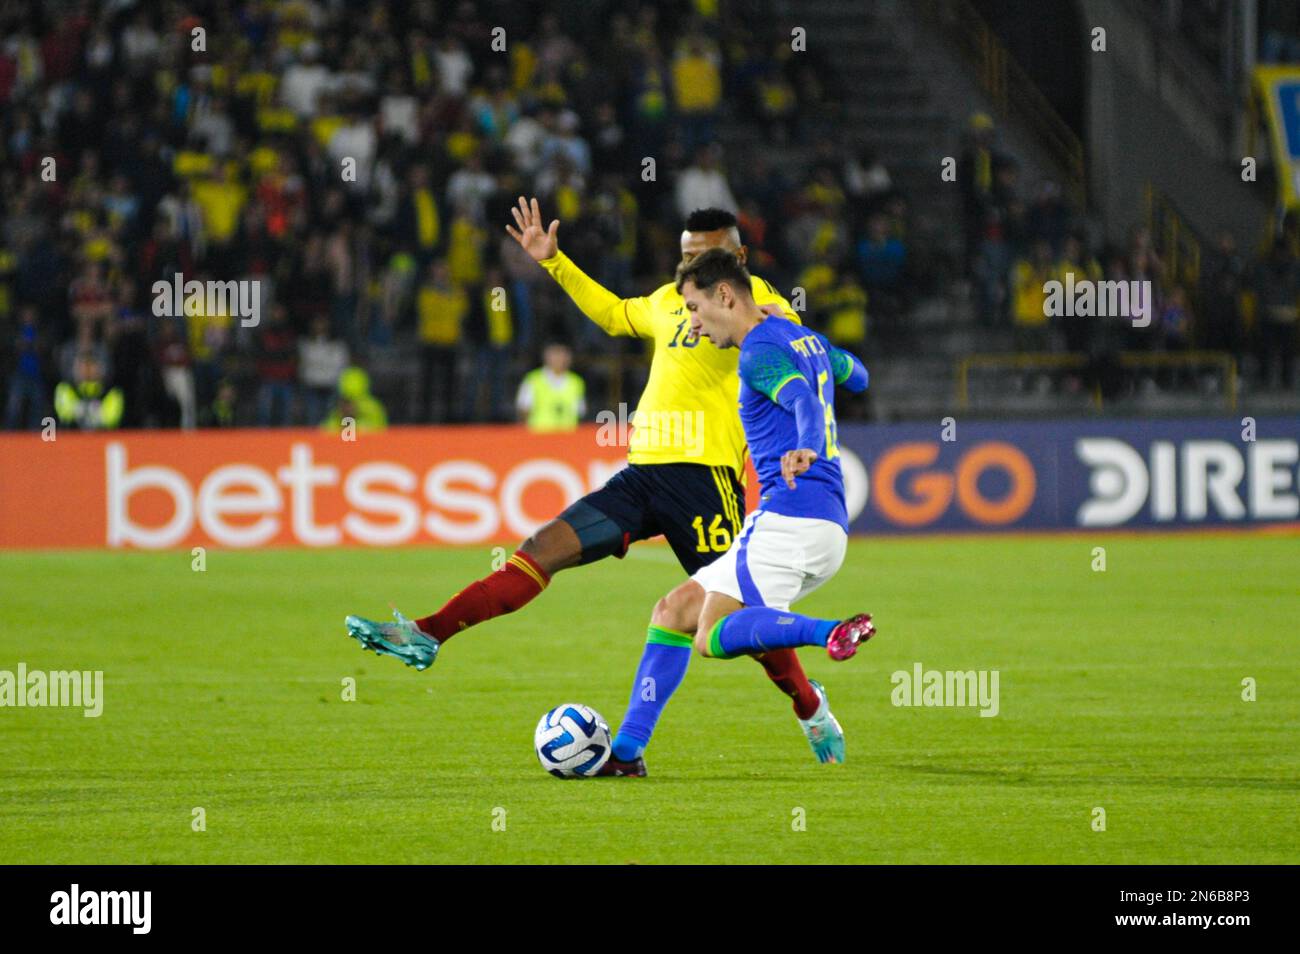 Bogota, Colombia on February 8, 2023. Colombia's Oscar Cortes and Brazil's Patryck during the CONMEBOL South American U-20 Colombia tournament match between Colombia and Brazil, in Bogota, Colombia on February 8, 2023. Photo by: Chepa Beltran/Long Visual Press Stock Photo